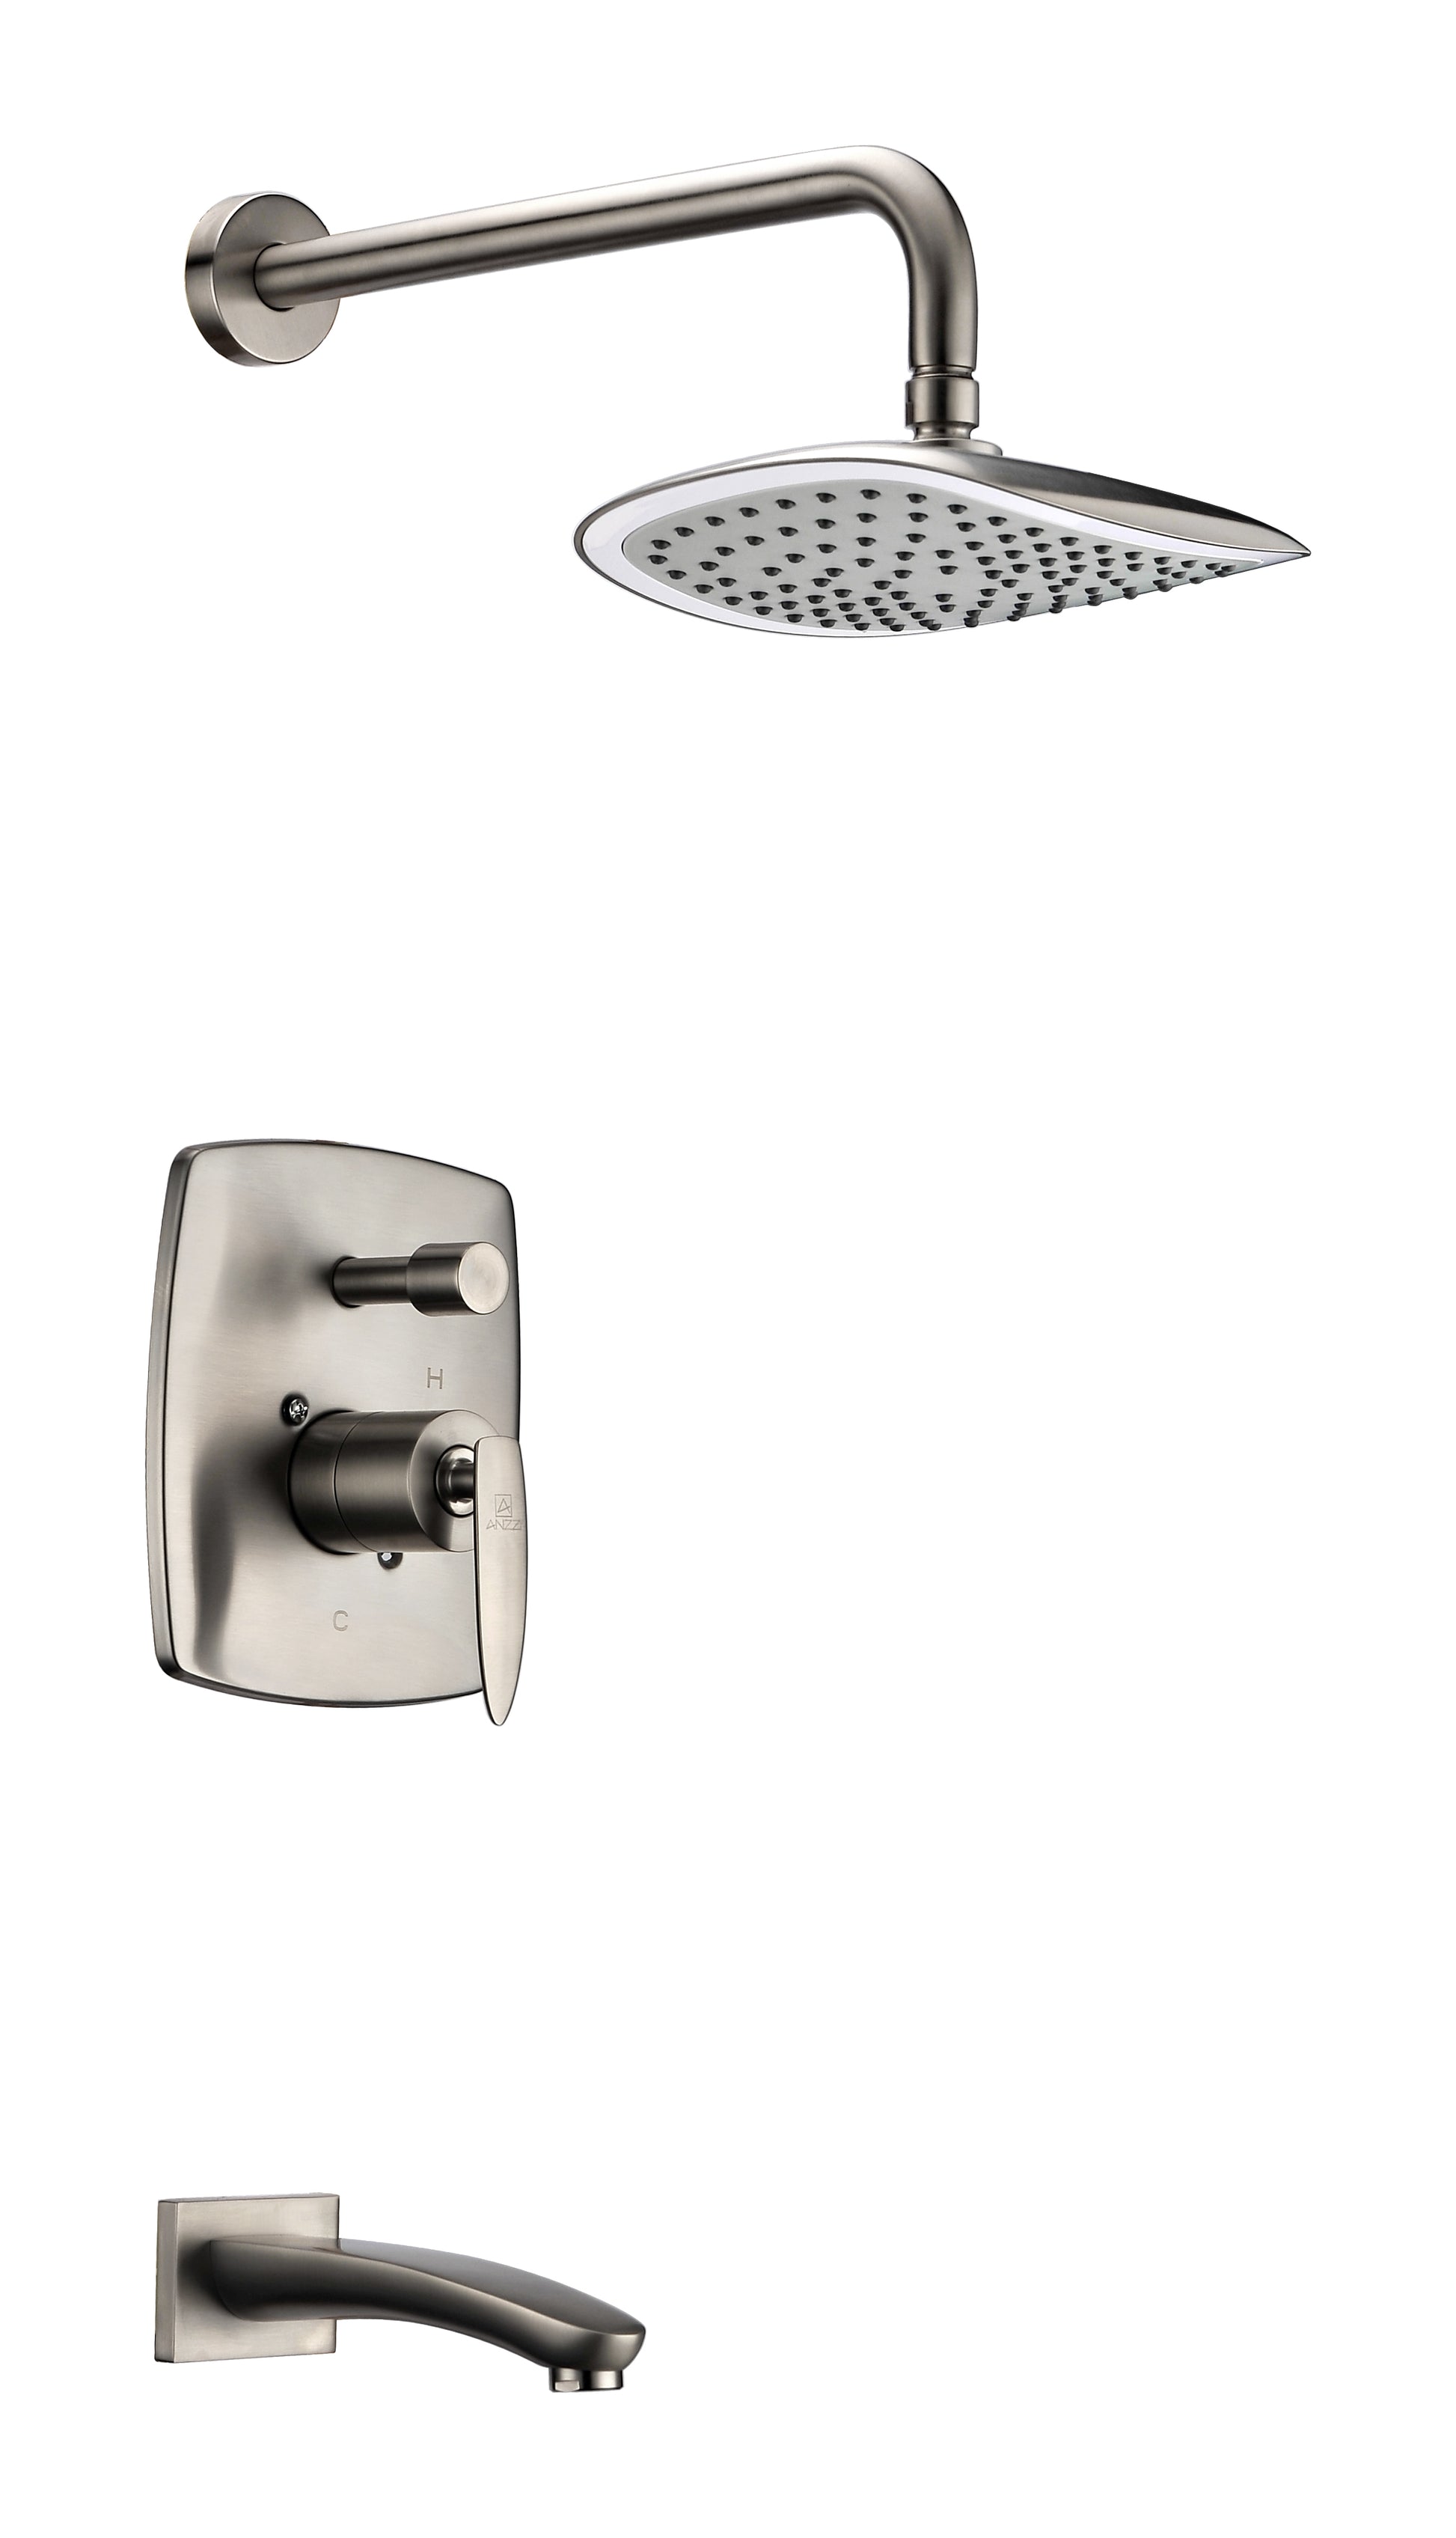 L-AZ026BN - Tempo Series 1-Handle 1-Spray Tub and Shower Faucet in Brushed Nickel